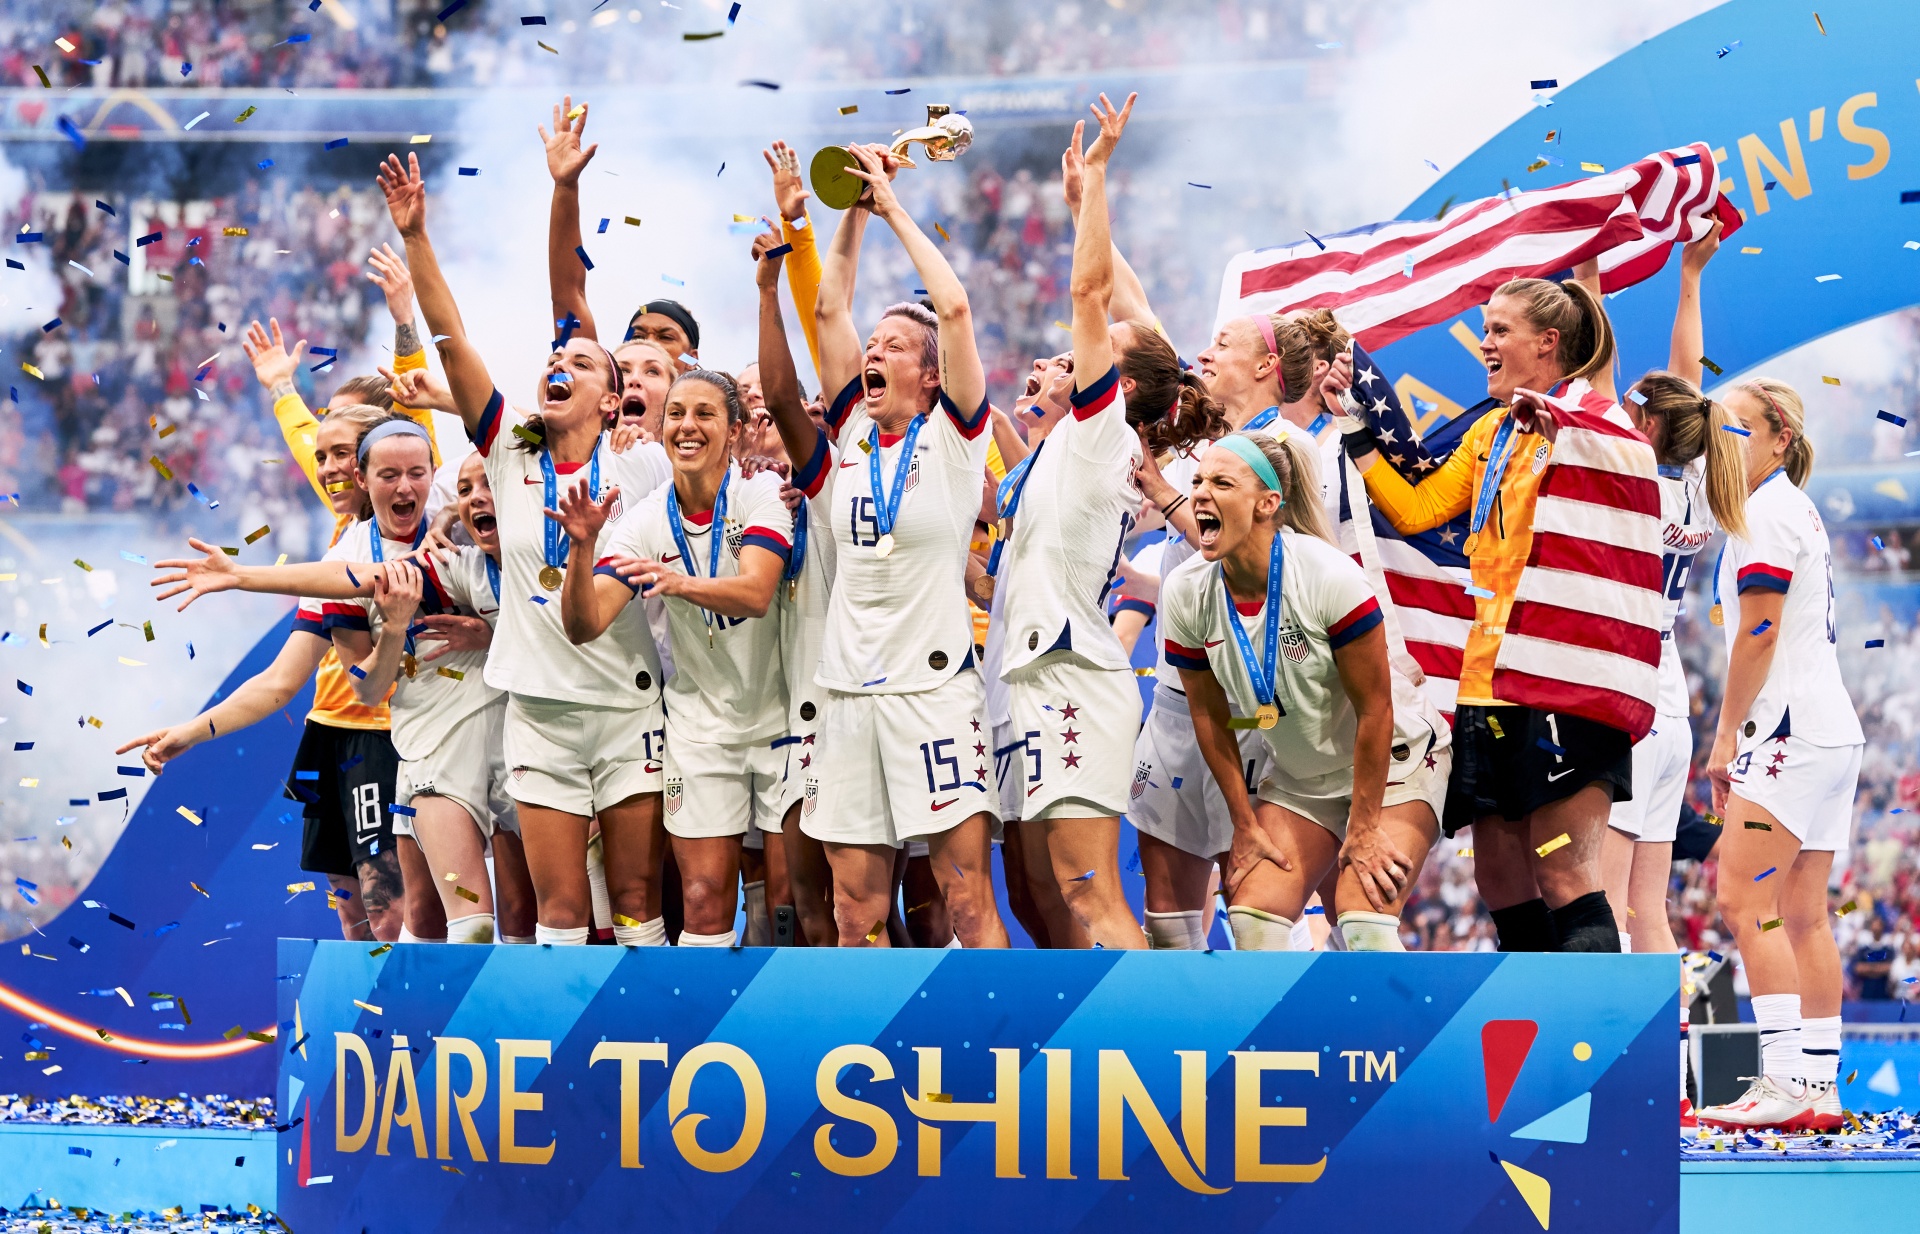 Megan Rapinoe (centre) and team-mates celebrate with the Fifa Women's World Cup Trophy after the final whistle after the FIFA Women's World Cup 2019 Final at the Stade de Lyon, Lyon, France